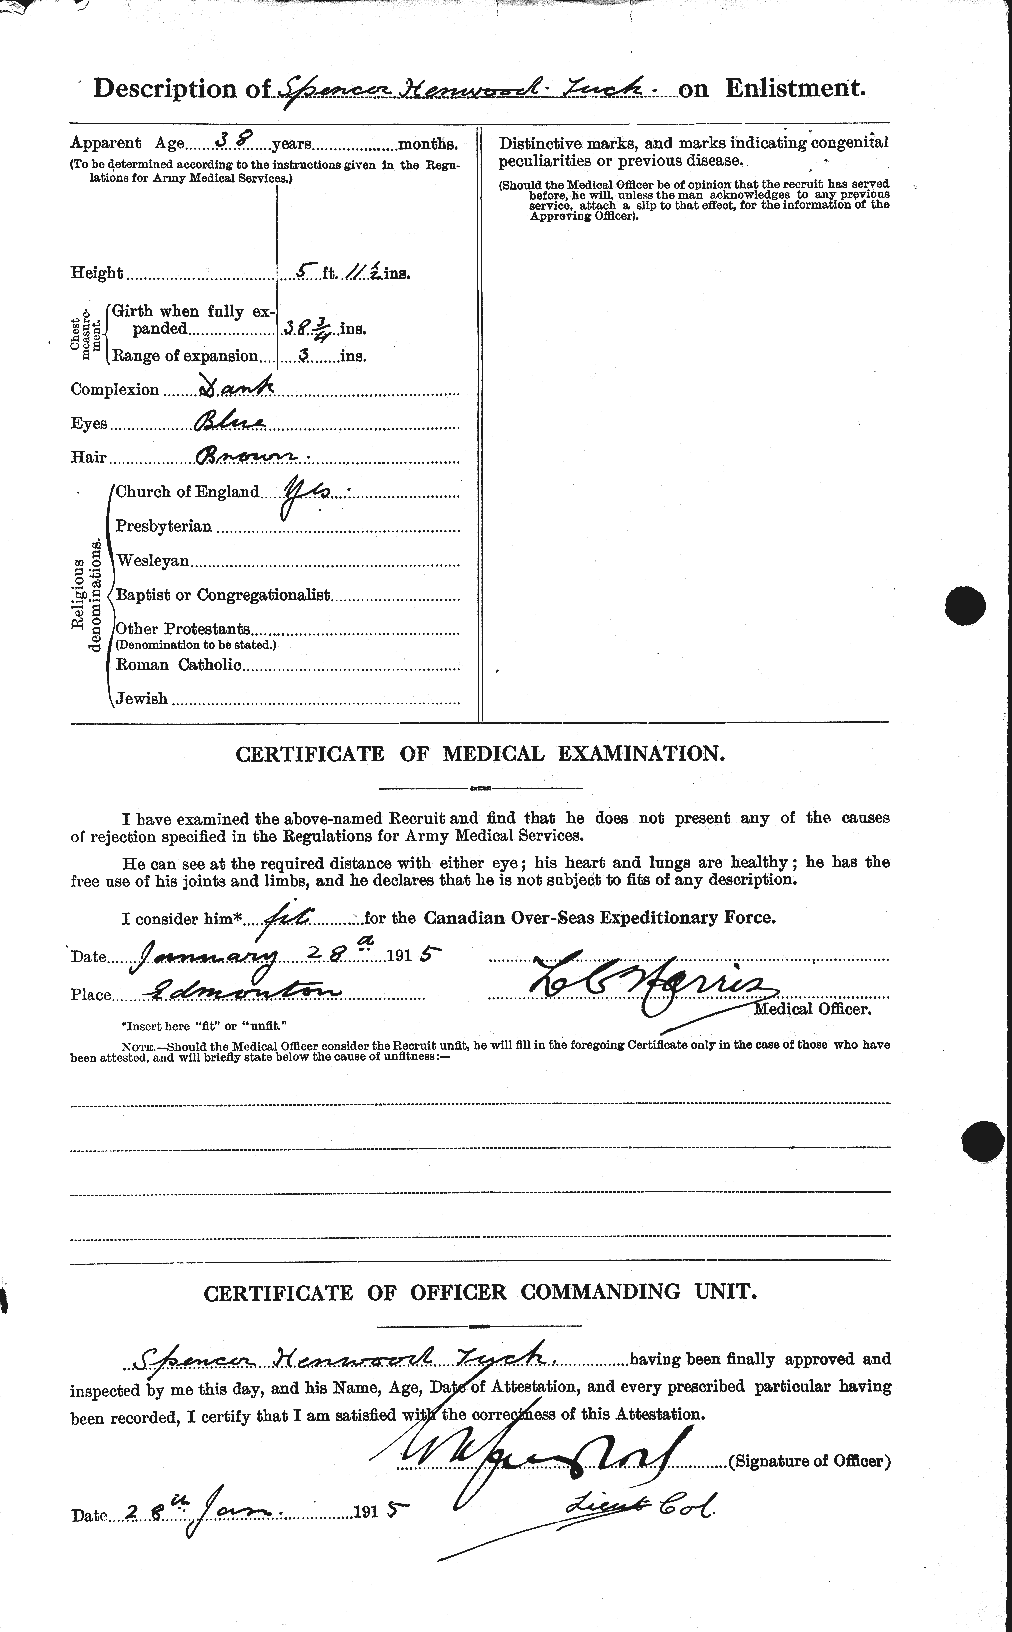 Personnel Records of the First World War - CEF 642616b